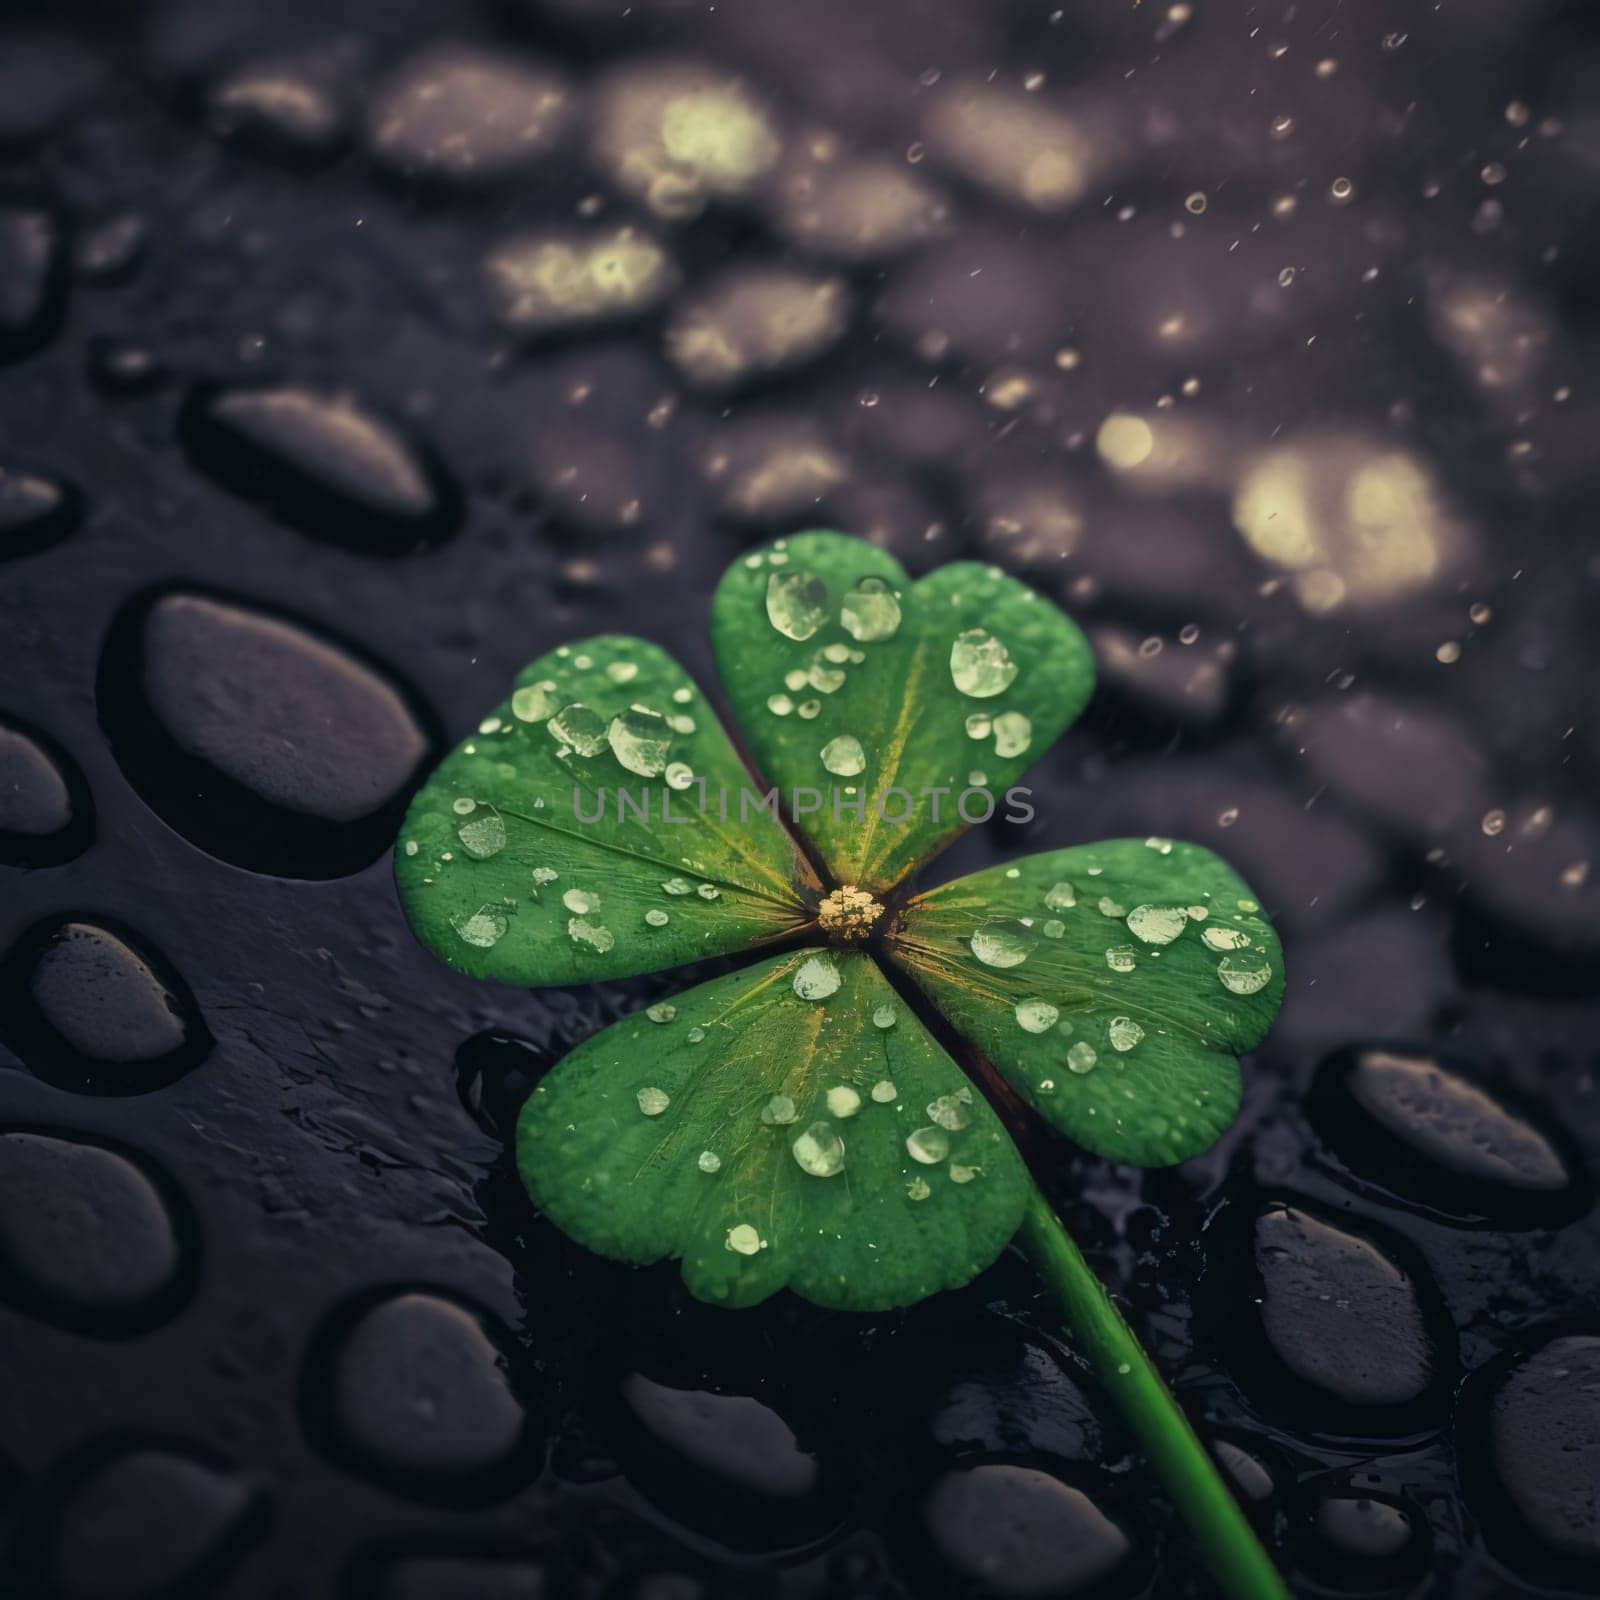 Four-leaf green clover with raindrops, dew on dark background with water drops. Green four-leaf clover symbol of St. Patrick's Day. by ThemesS